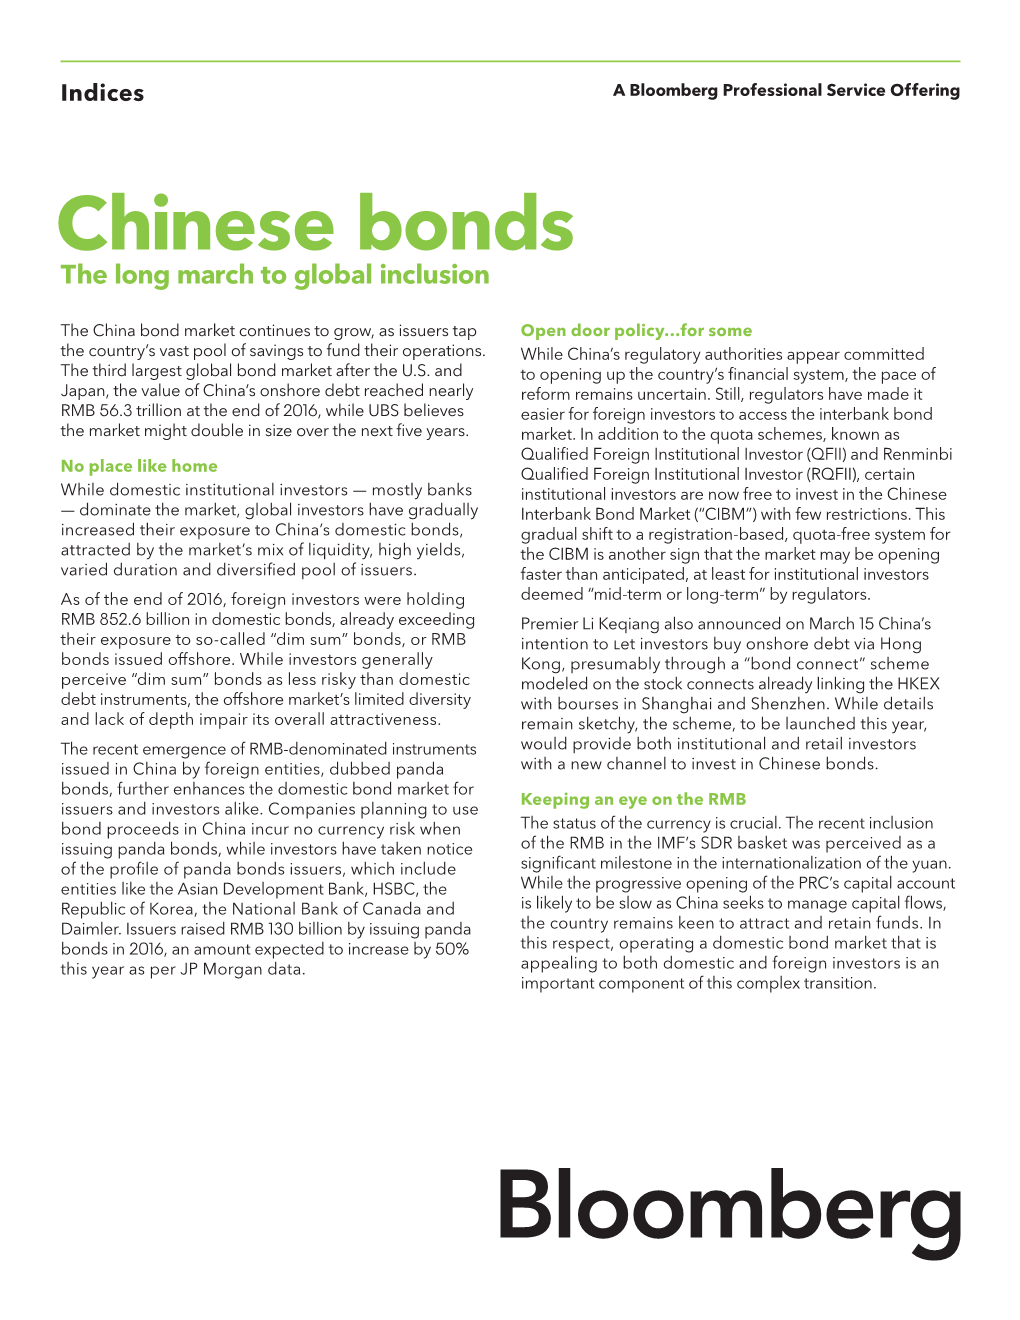 Chinese Bonds the Long March to Global Inclusion